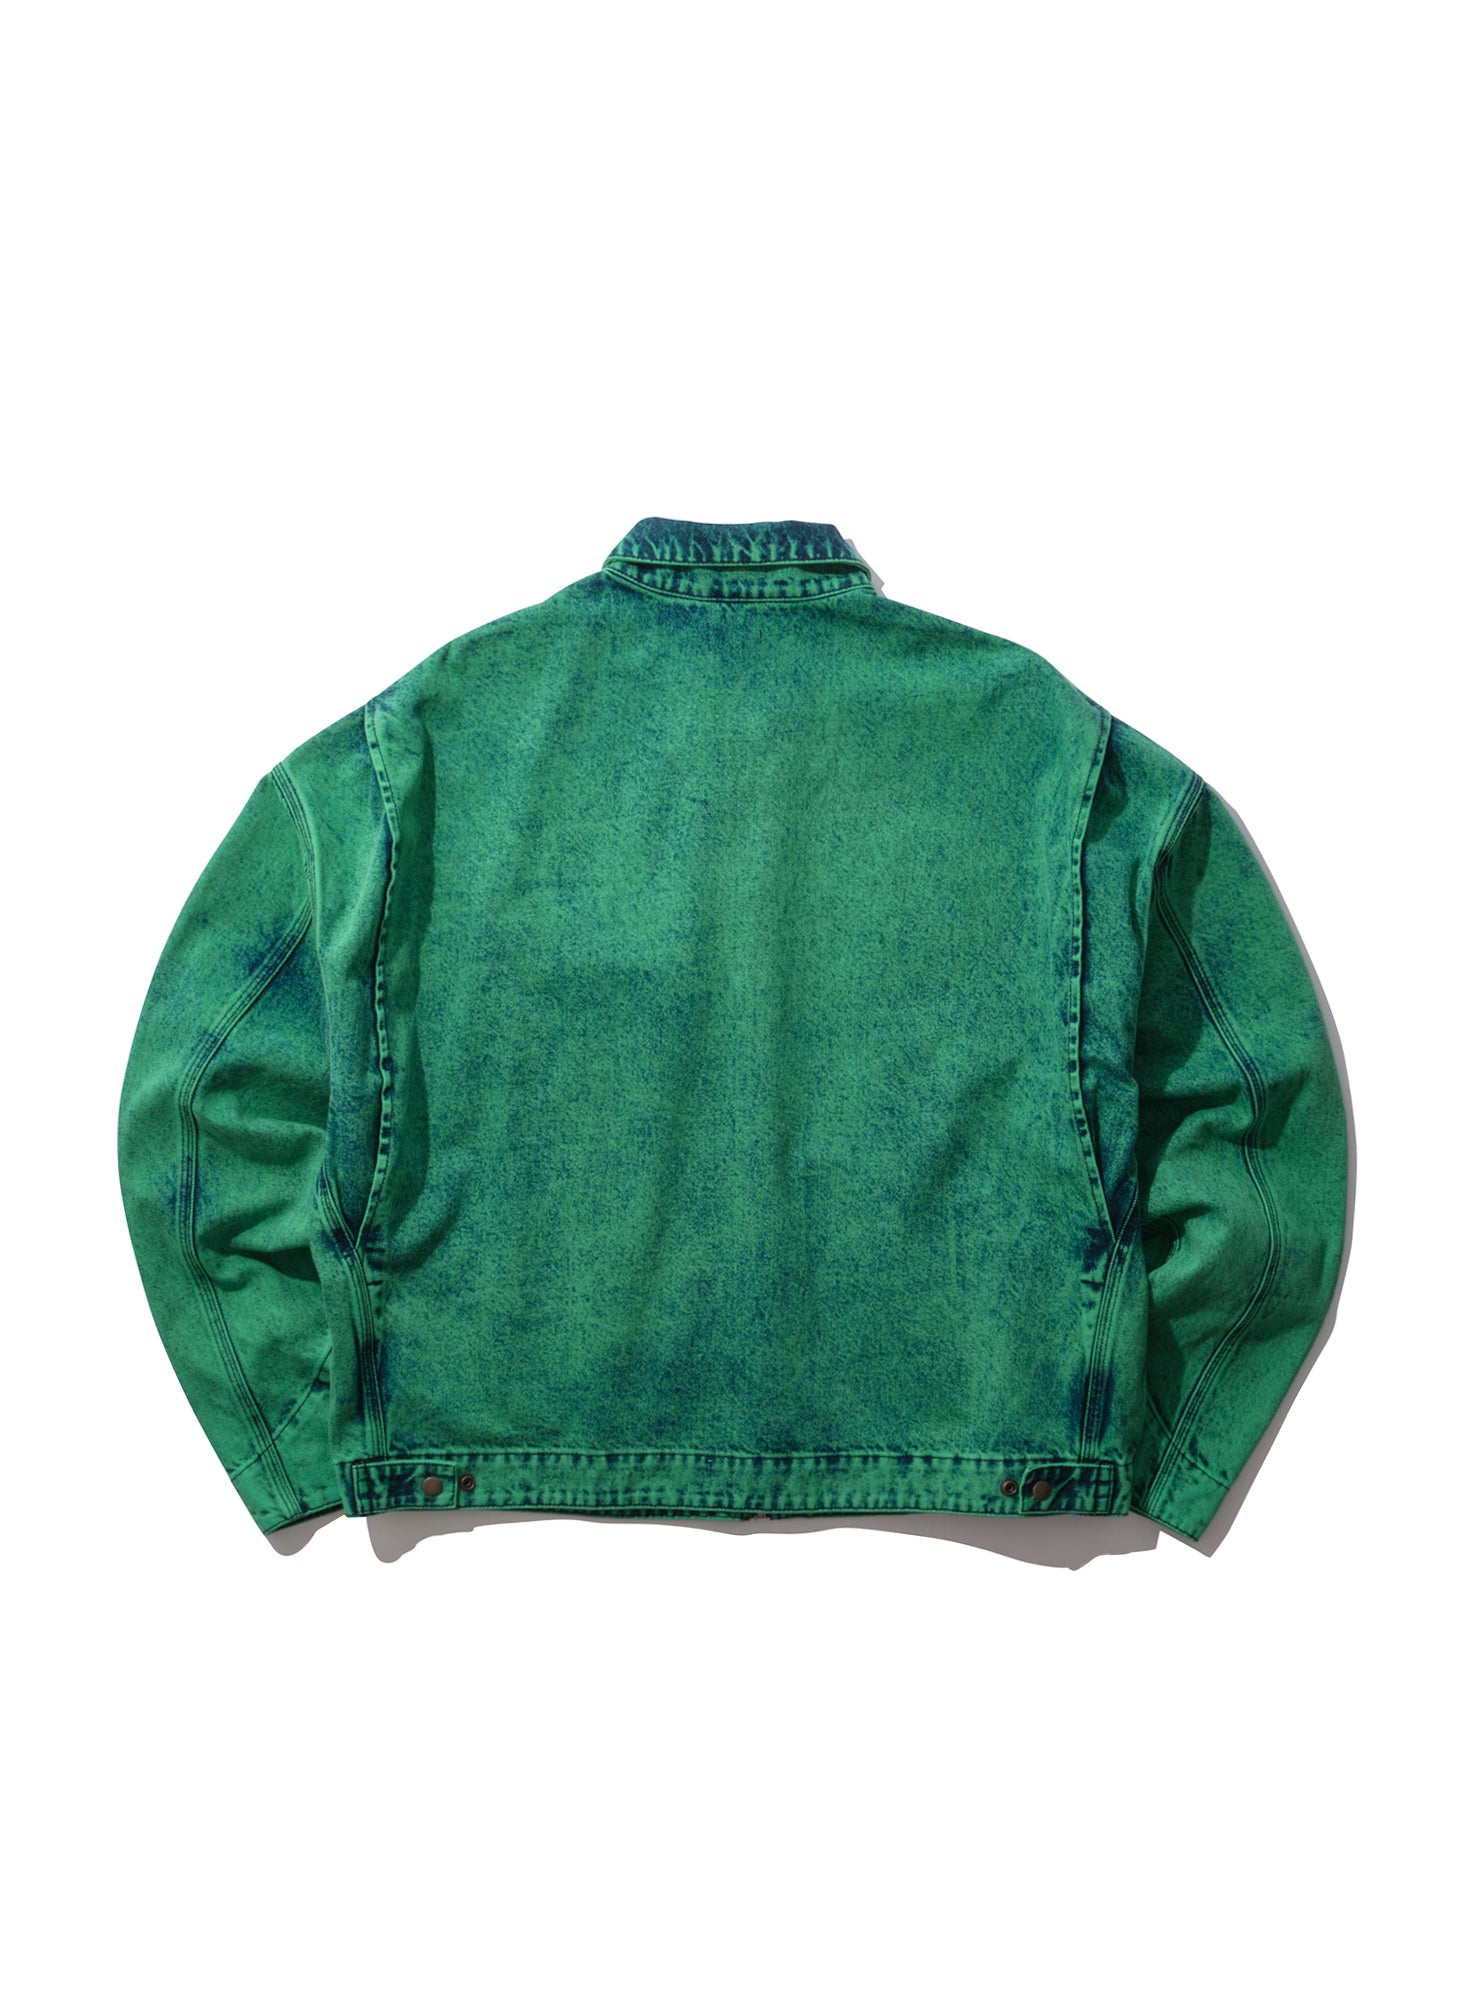 <span style="color: #f50b0b;">Last One</span> WILLY CHAVARRIA / DOWNTOWN JACKET OVERD GREEN